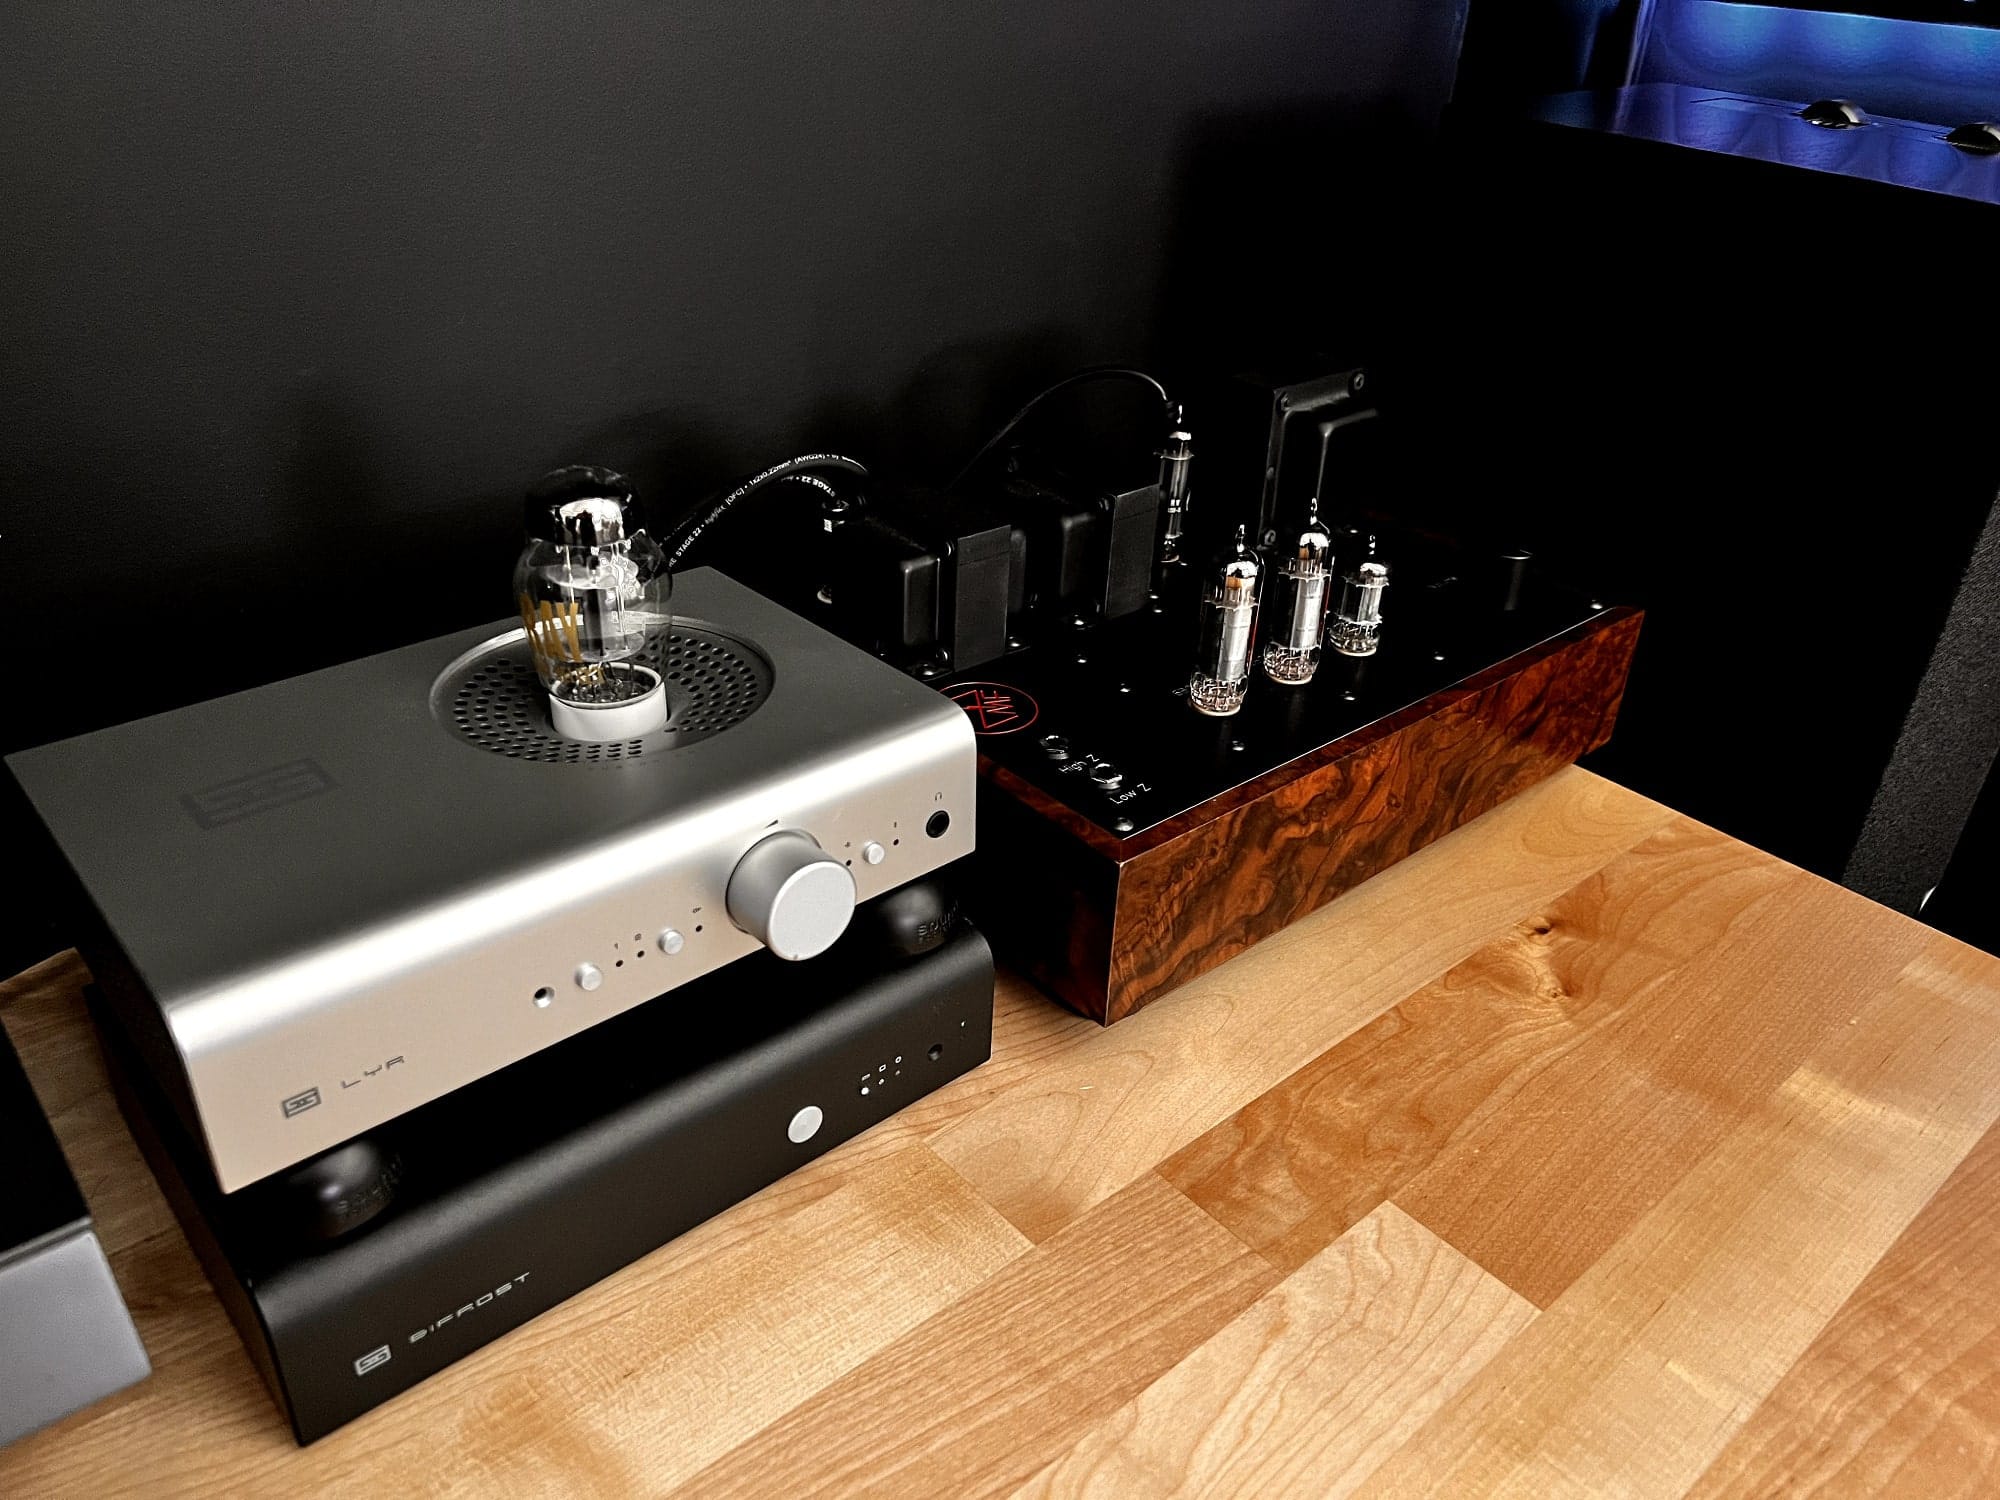 A close-up of high-end audio equipment on a wooden desk, featuring a silver Schiit Lyr 3 tube amplifier stacked on a black Schiit Bifrost DAC, and a custom Feliks Audio Euforia tube amplifier with a wooden enclosure and exposed vacuum tubes.